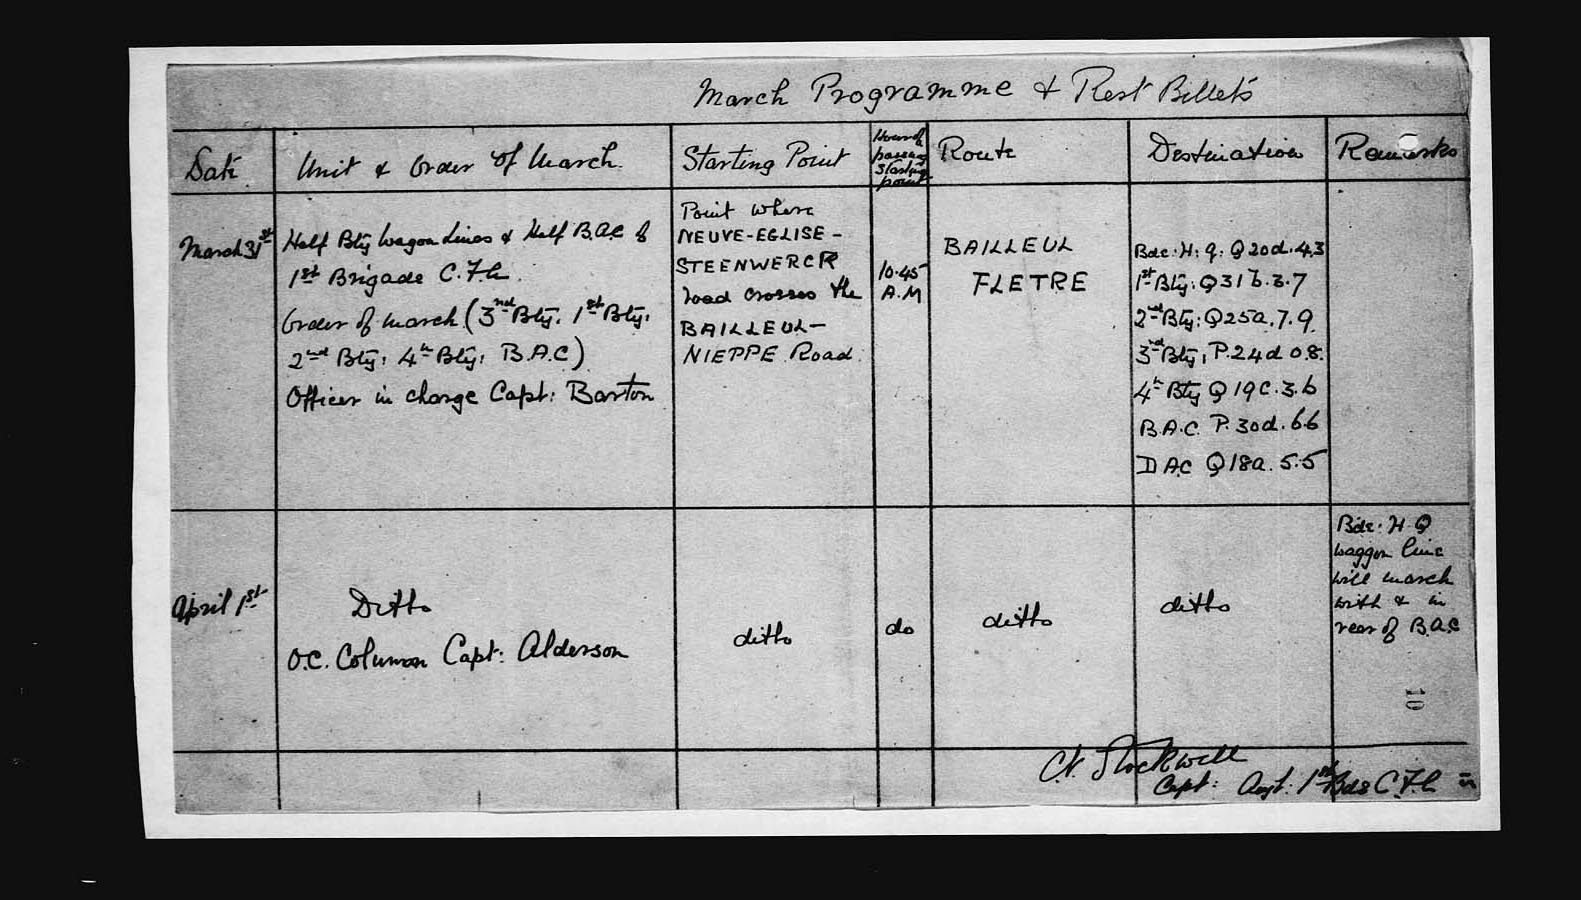 War Diaries 1st. Bde. C.F.A March Programme and Rest Biilets March 31,1916